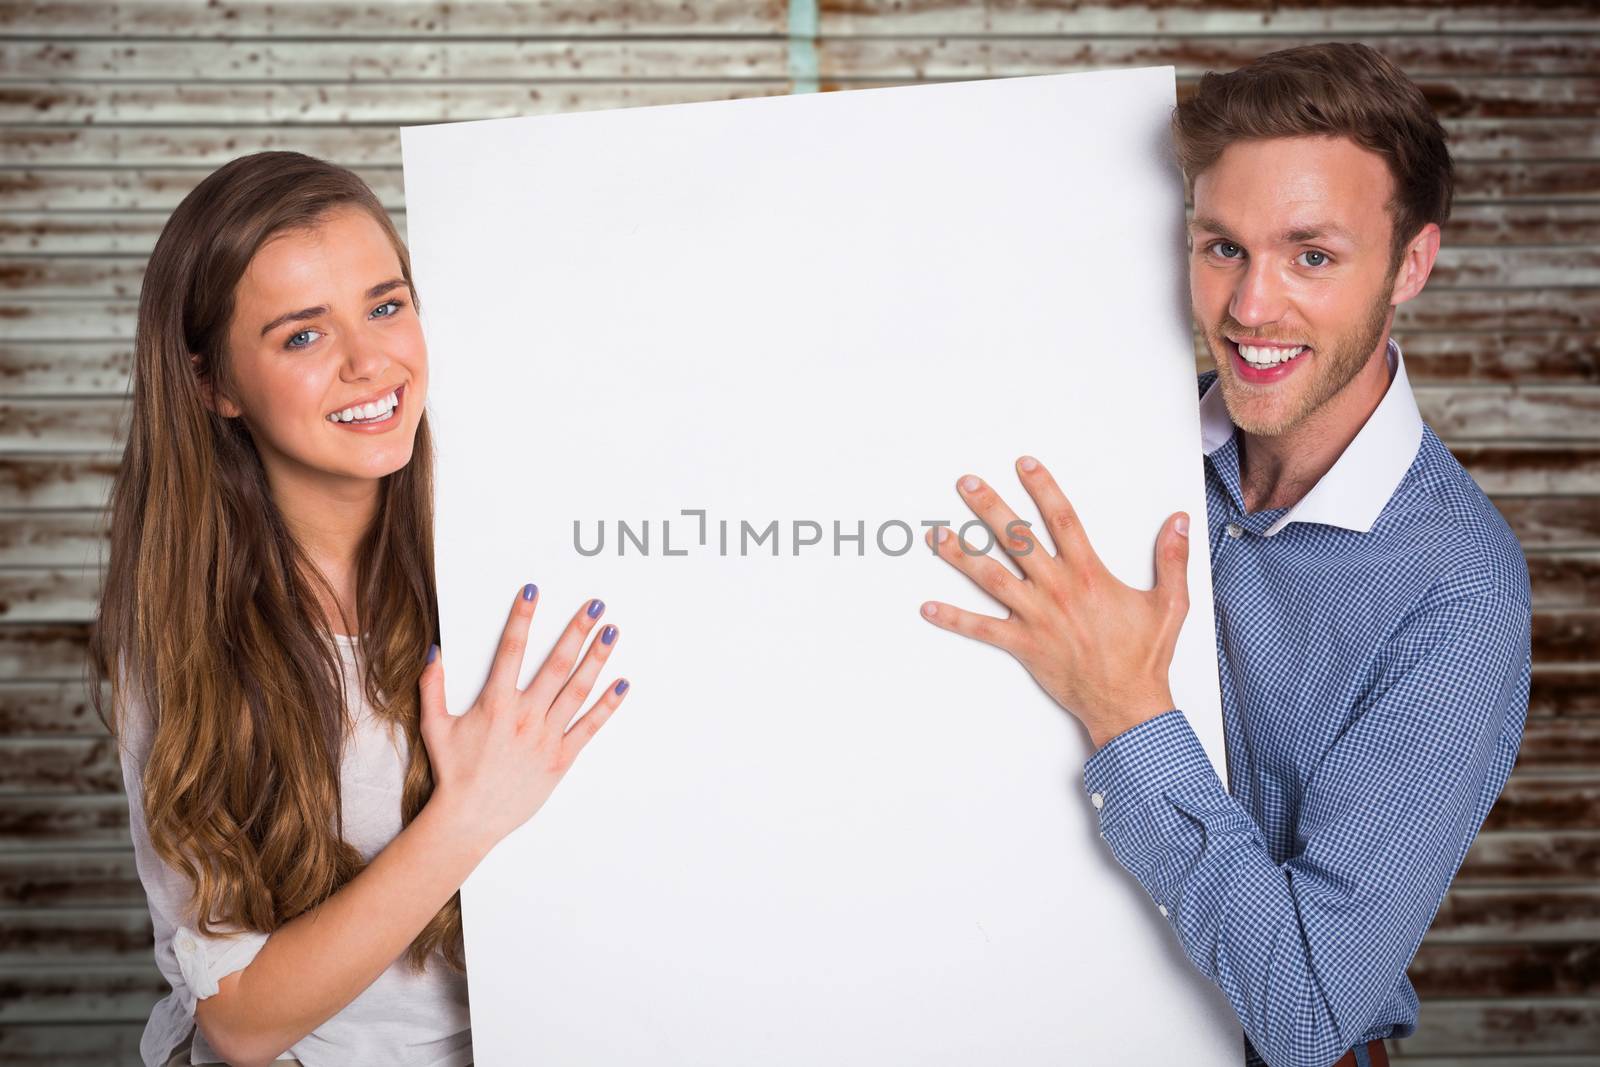 Happy young couple with blank board against wooden planks